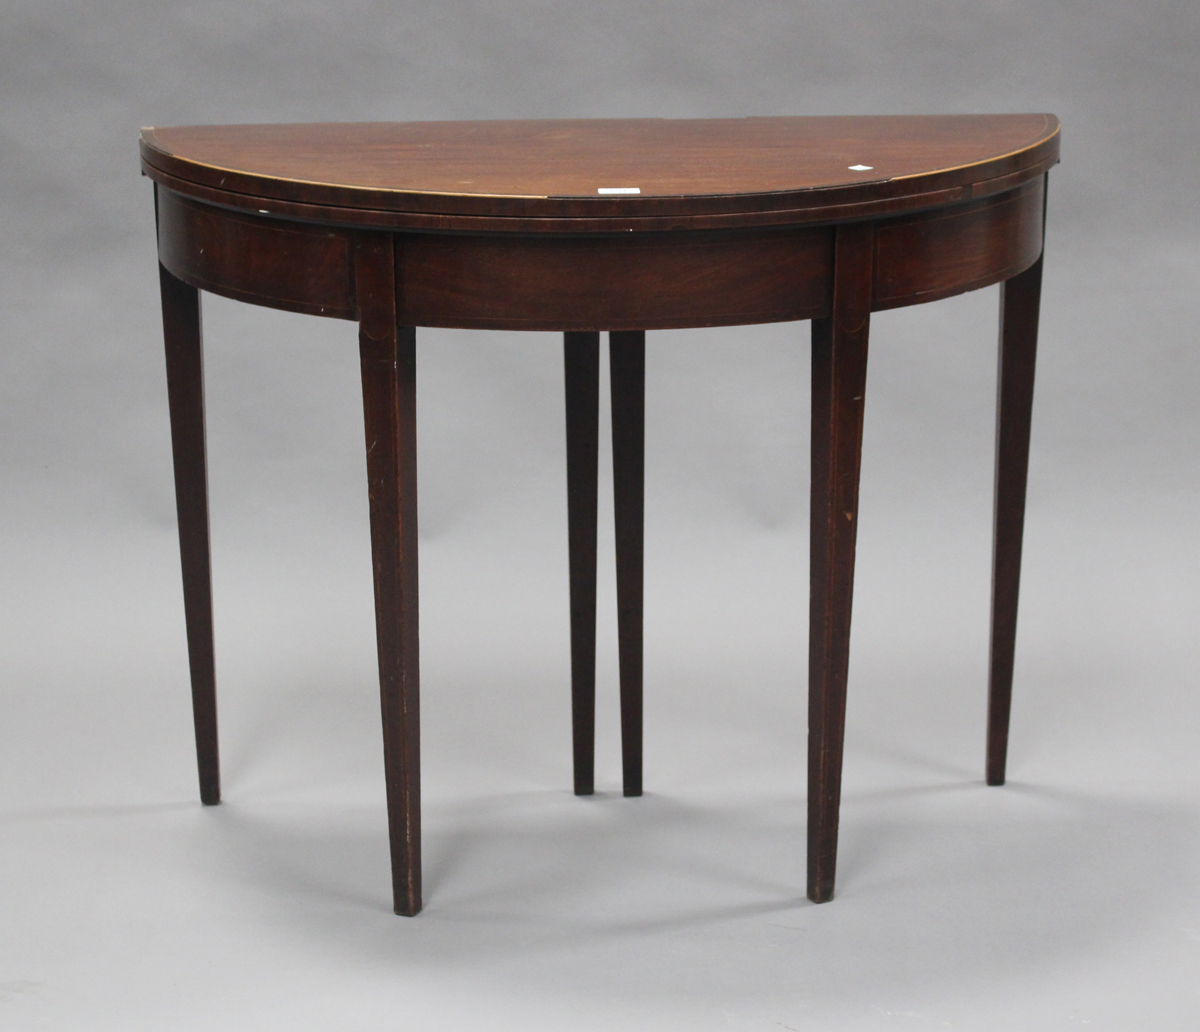 A late George III mahogany fold-over demi-lune tea table with crossbanded borders and boxwood